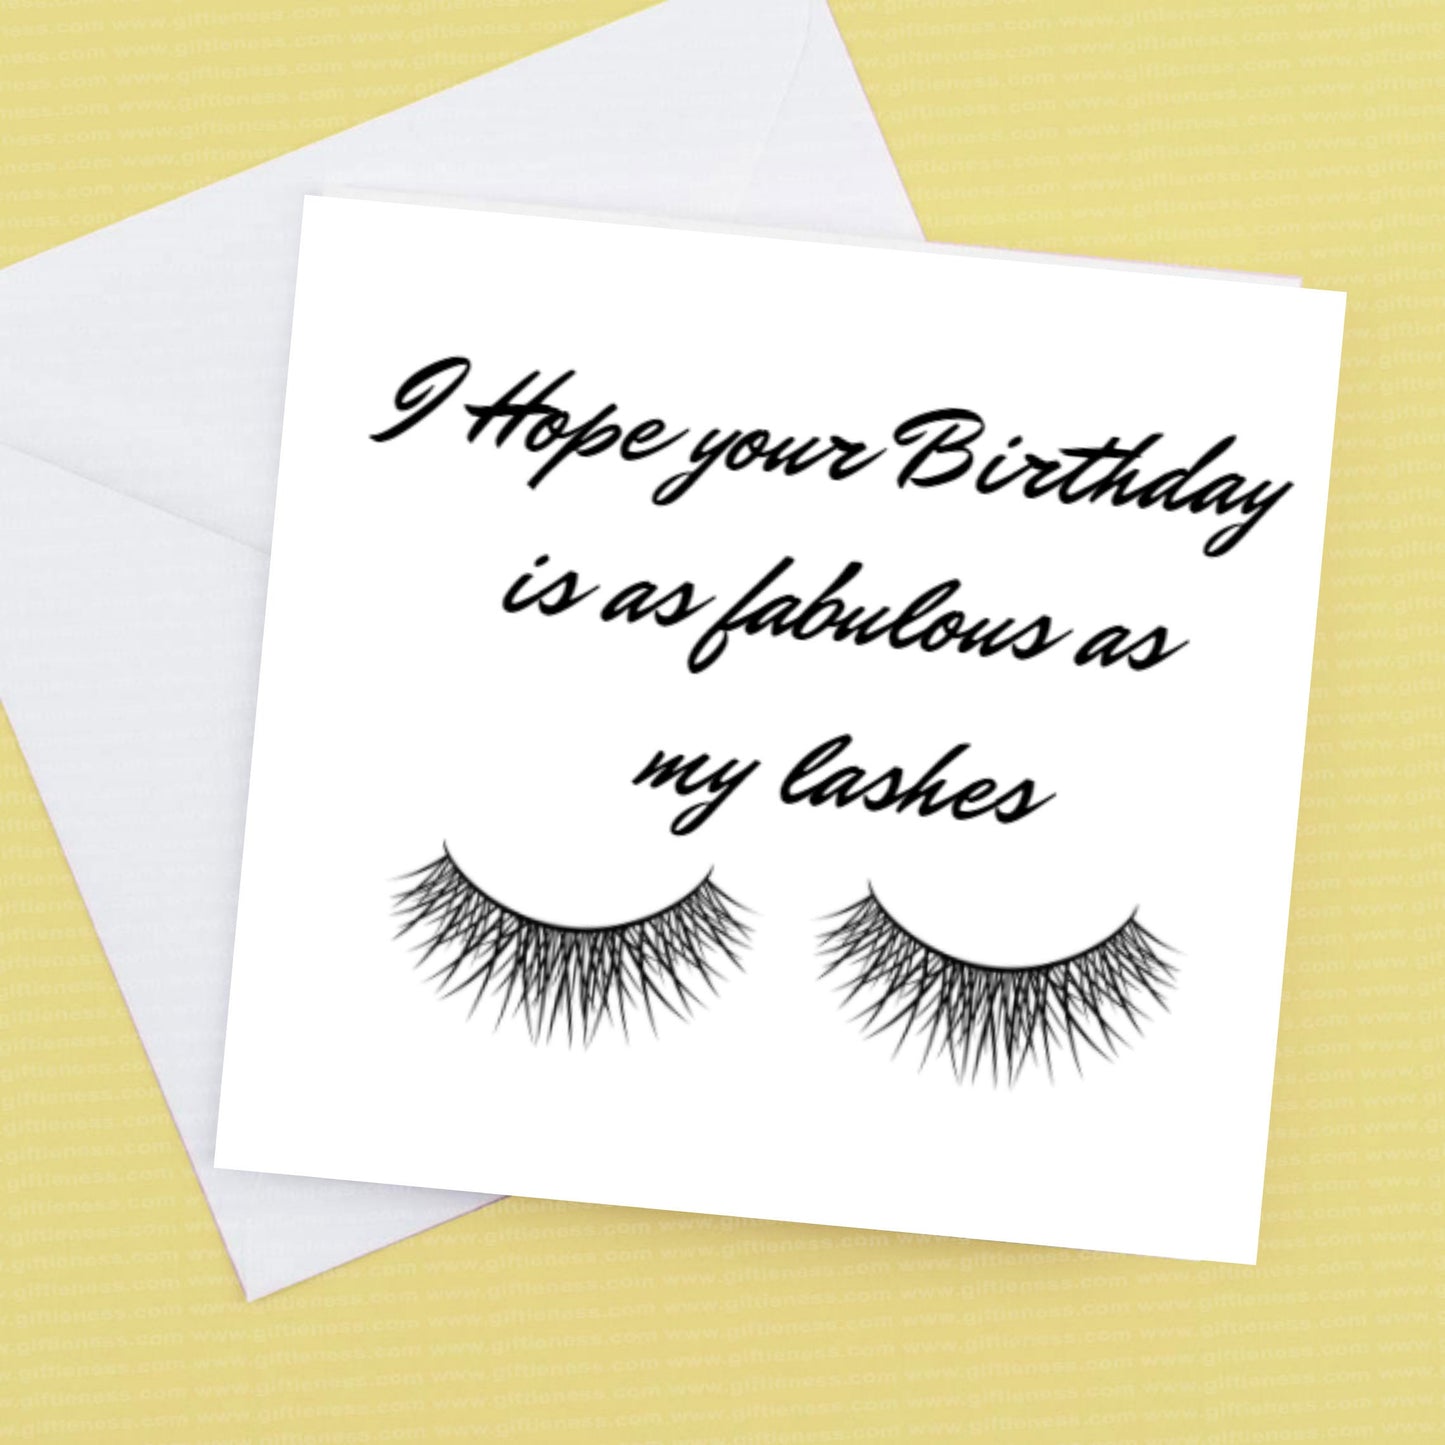 I hope your birthday is as Fabulous as my lashes